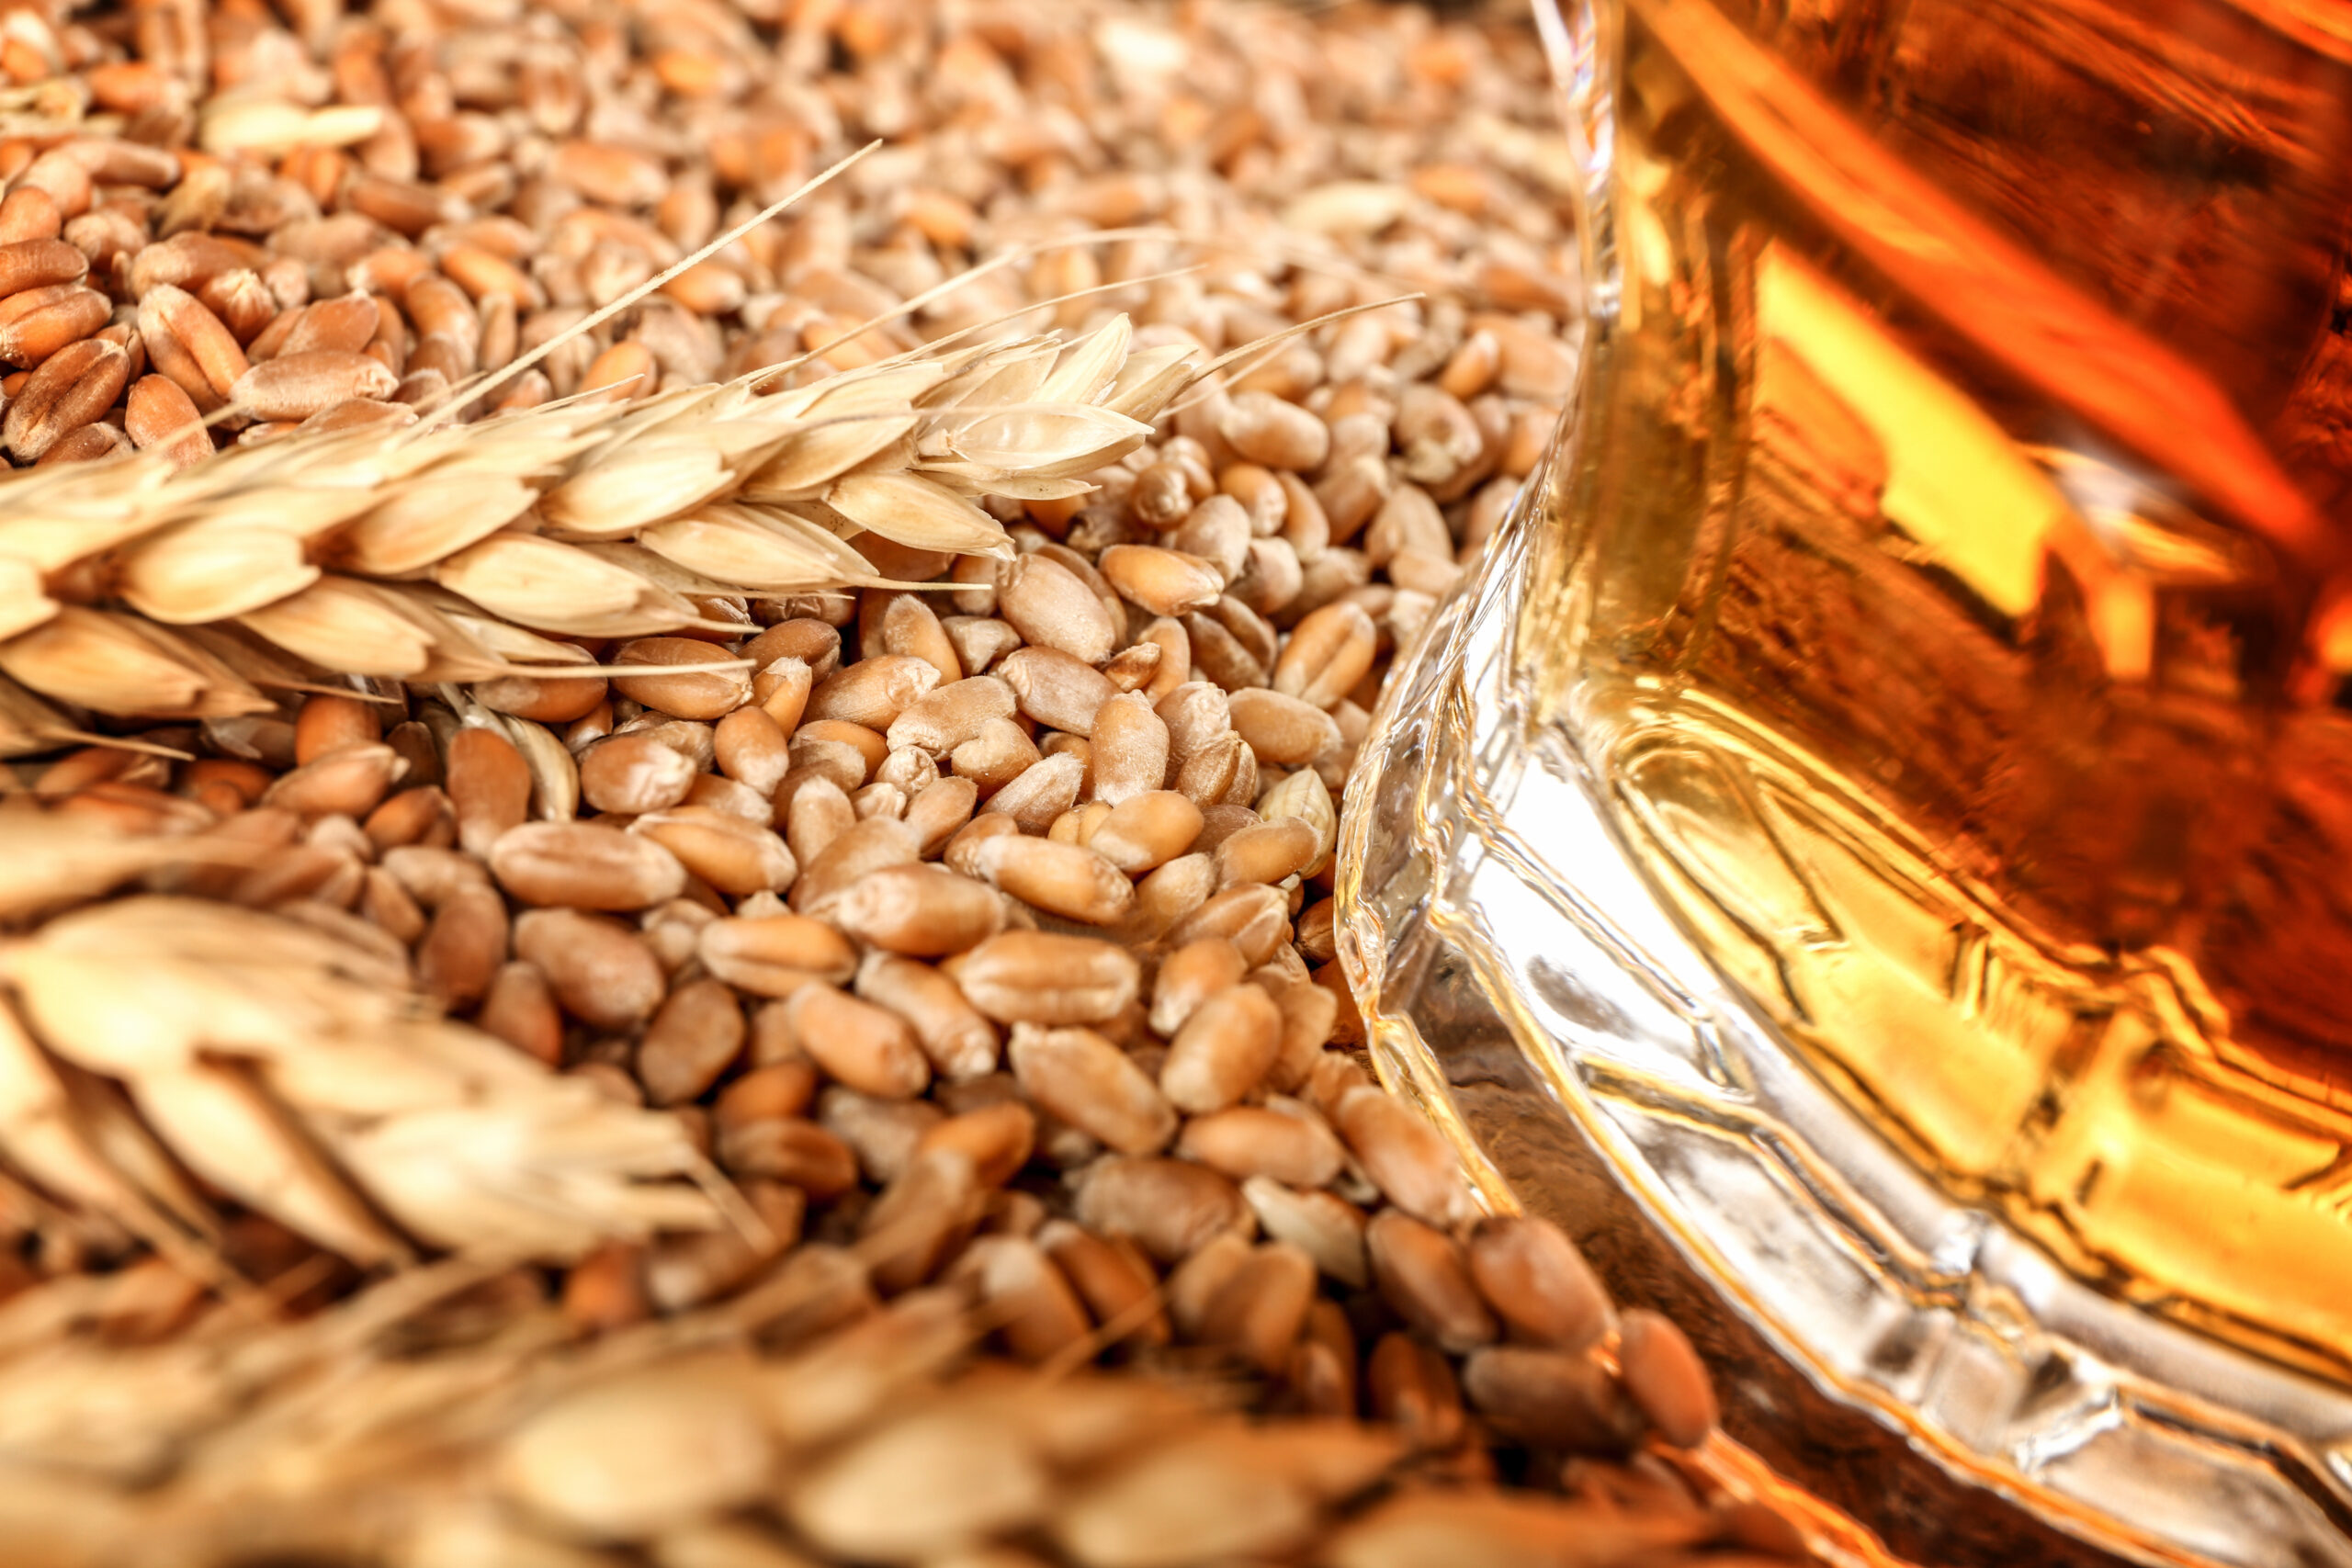 A glass of beer sits on top of grain and wheat.